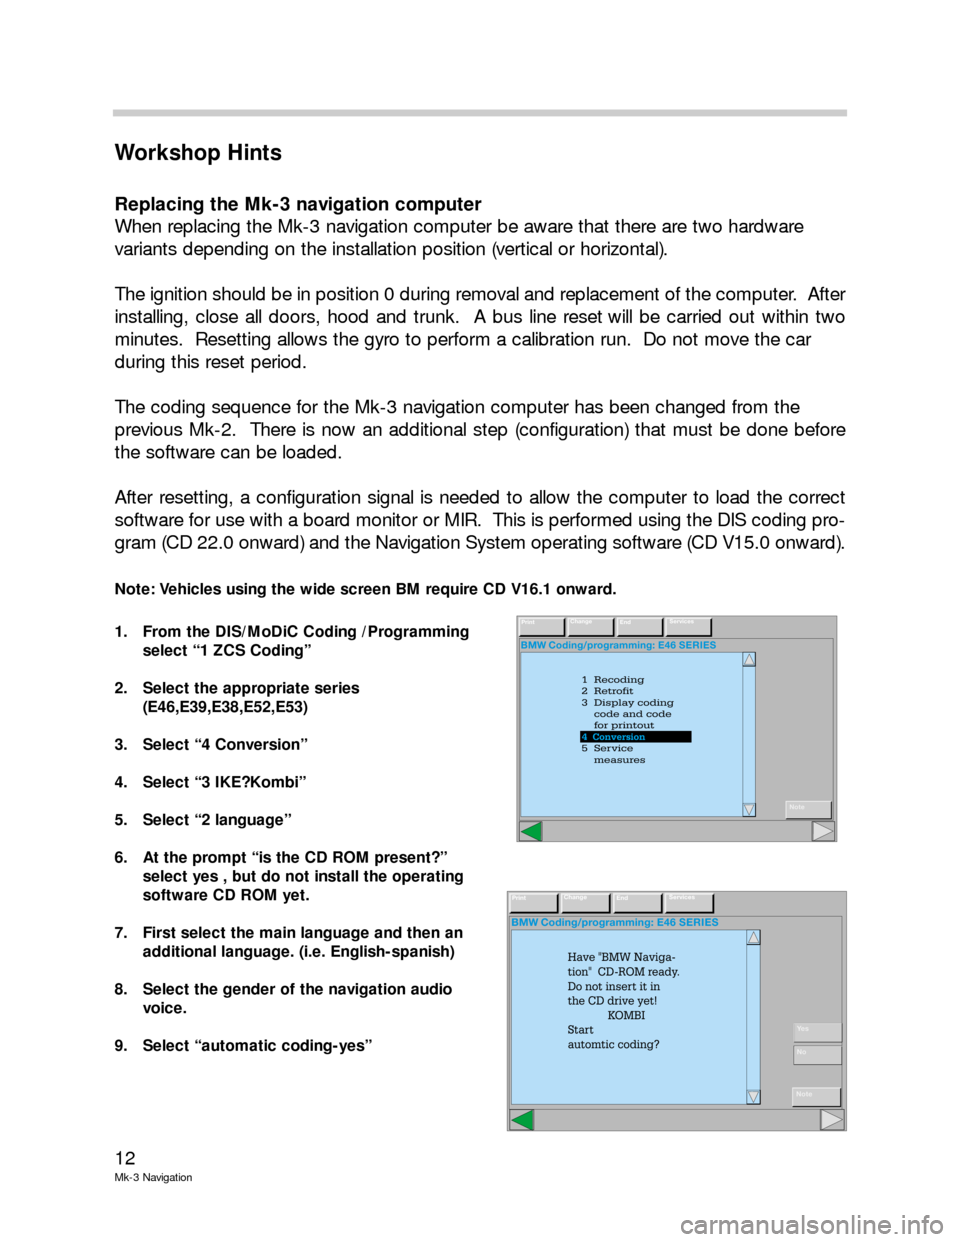 BMW X5 2001 E53 Mk3 Navigation System Manual 12
Mk-3 Navigation
Workshop Hints
Replacing the Mk-3 navigation computer
When replacing the Mk-3 navigation computer be aware that there are two hardware 
variants depending on the installation positi